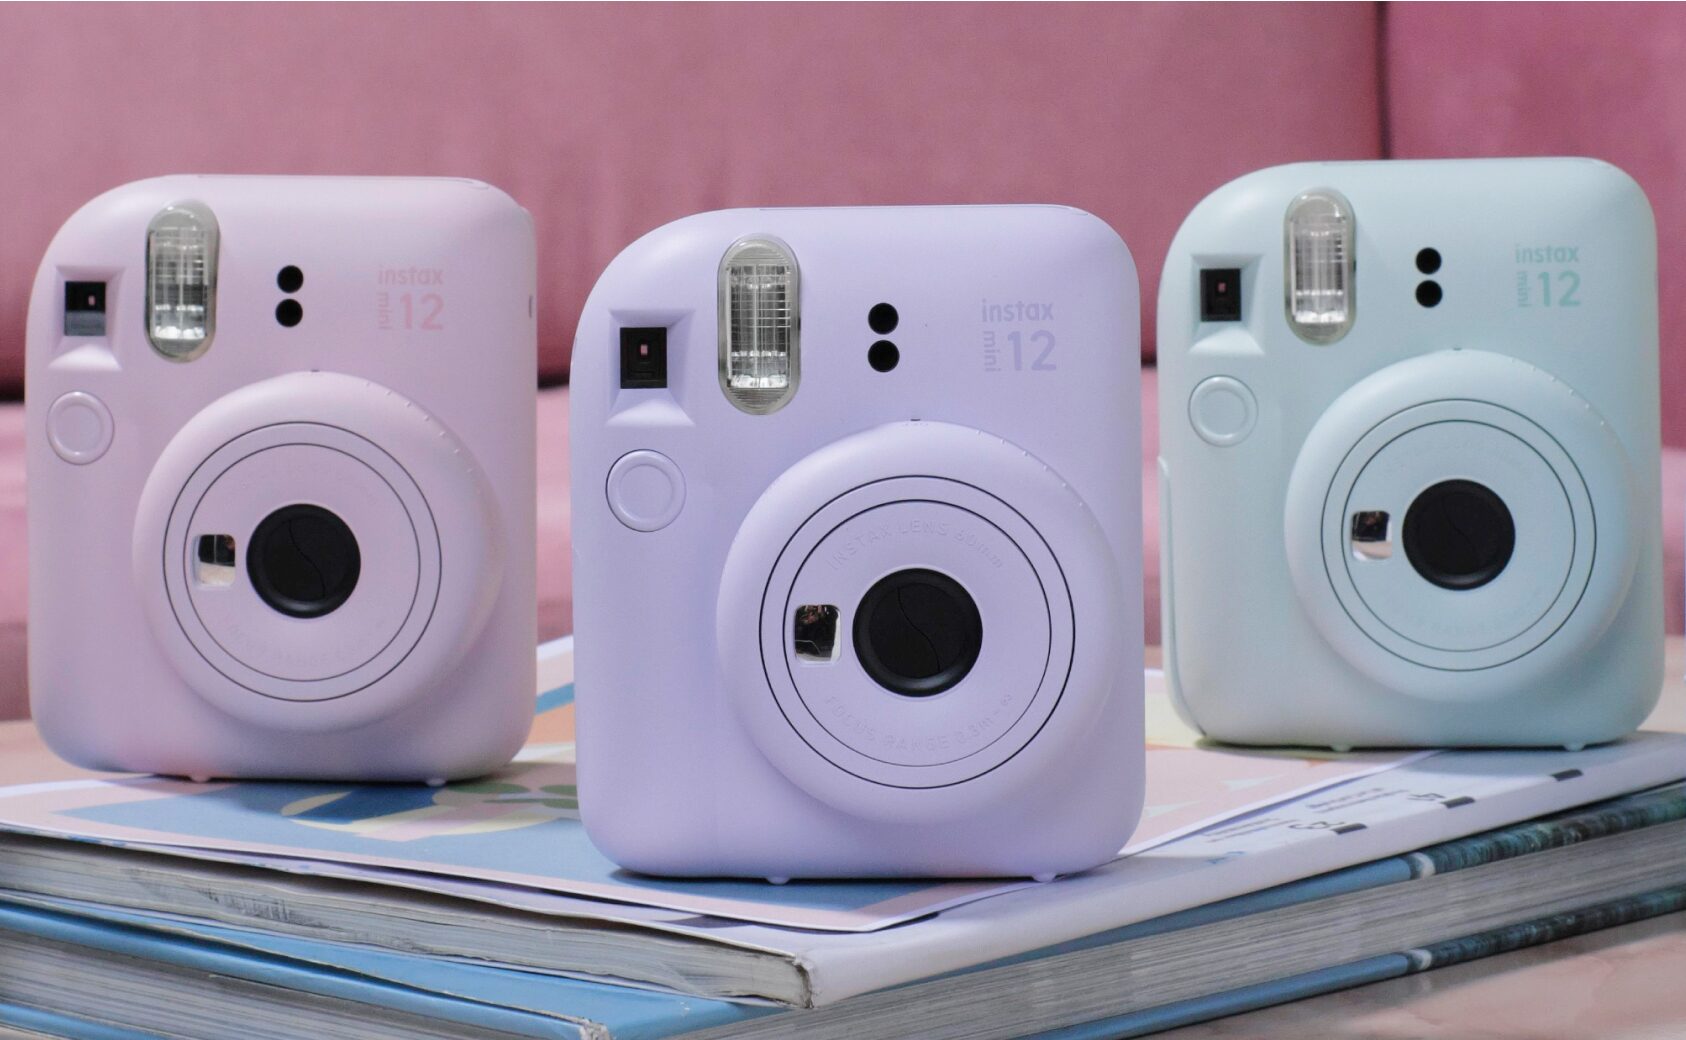 INSTAX Mini 12 cameras in pink, purple and green.